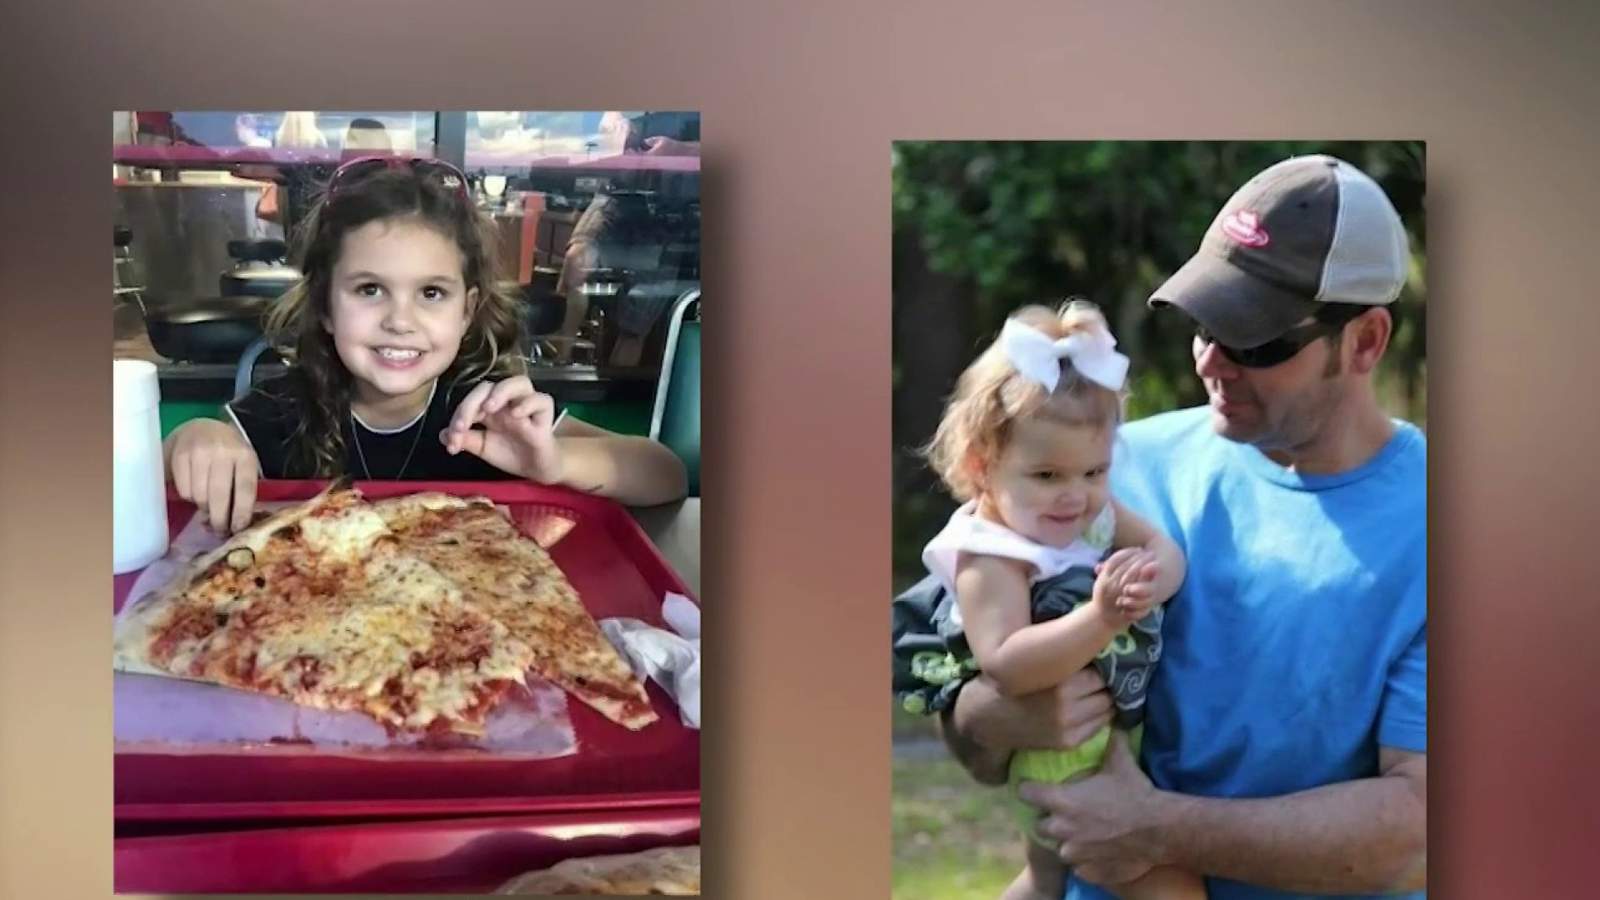 Community comes together to help widower, father of 2 through Sanford Relief Fund